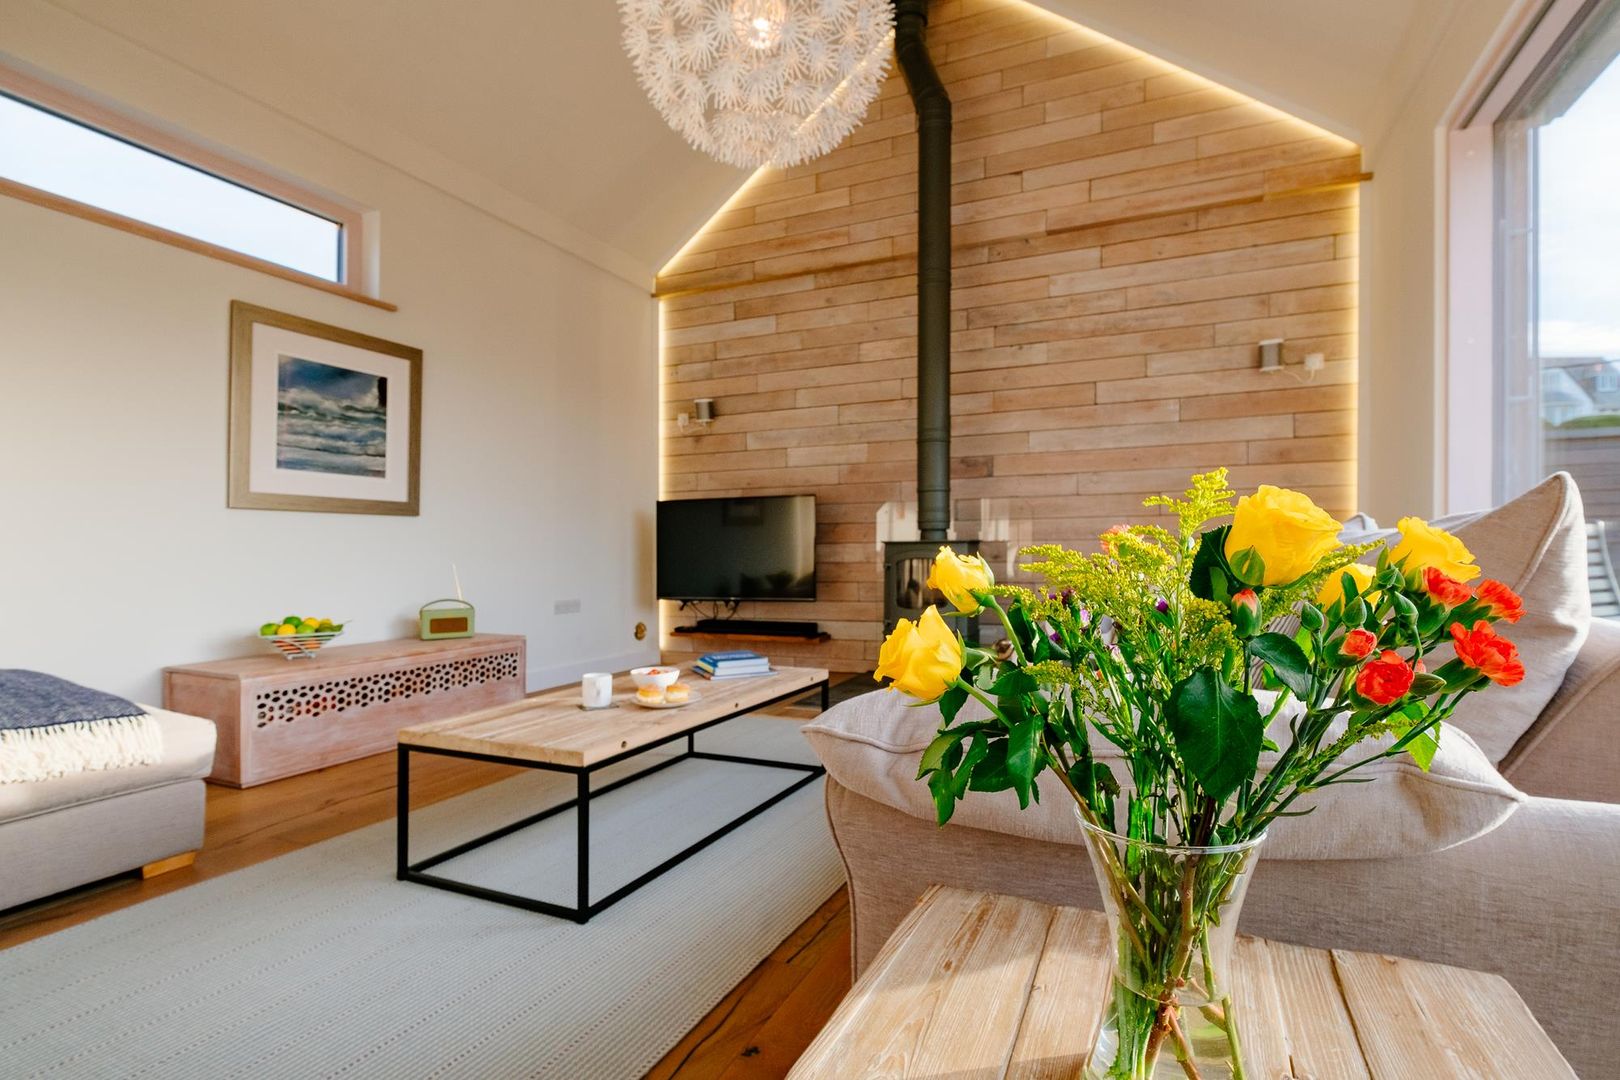 Treasure House, Polzeath | Cornwall, Perfect Stays Perfect Stays Salones rústicos rústicos Lighting,wooden clad,living room,light,holiday home,beach house